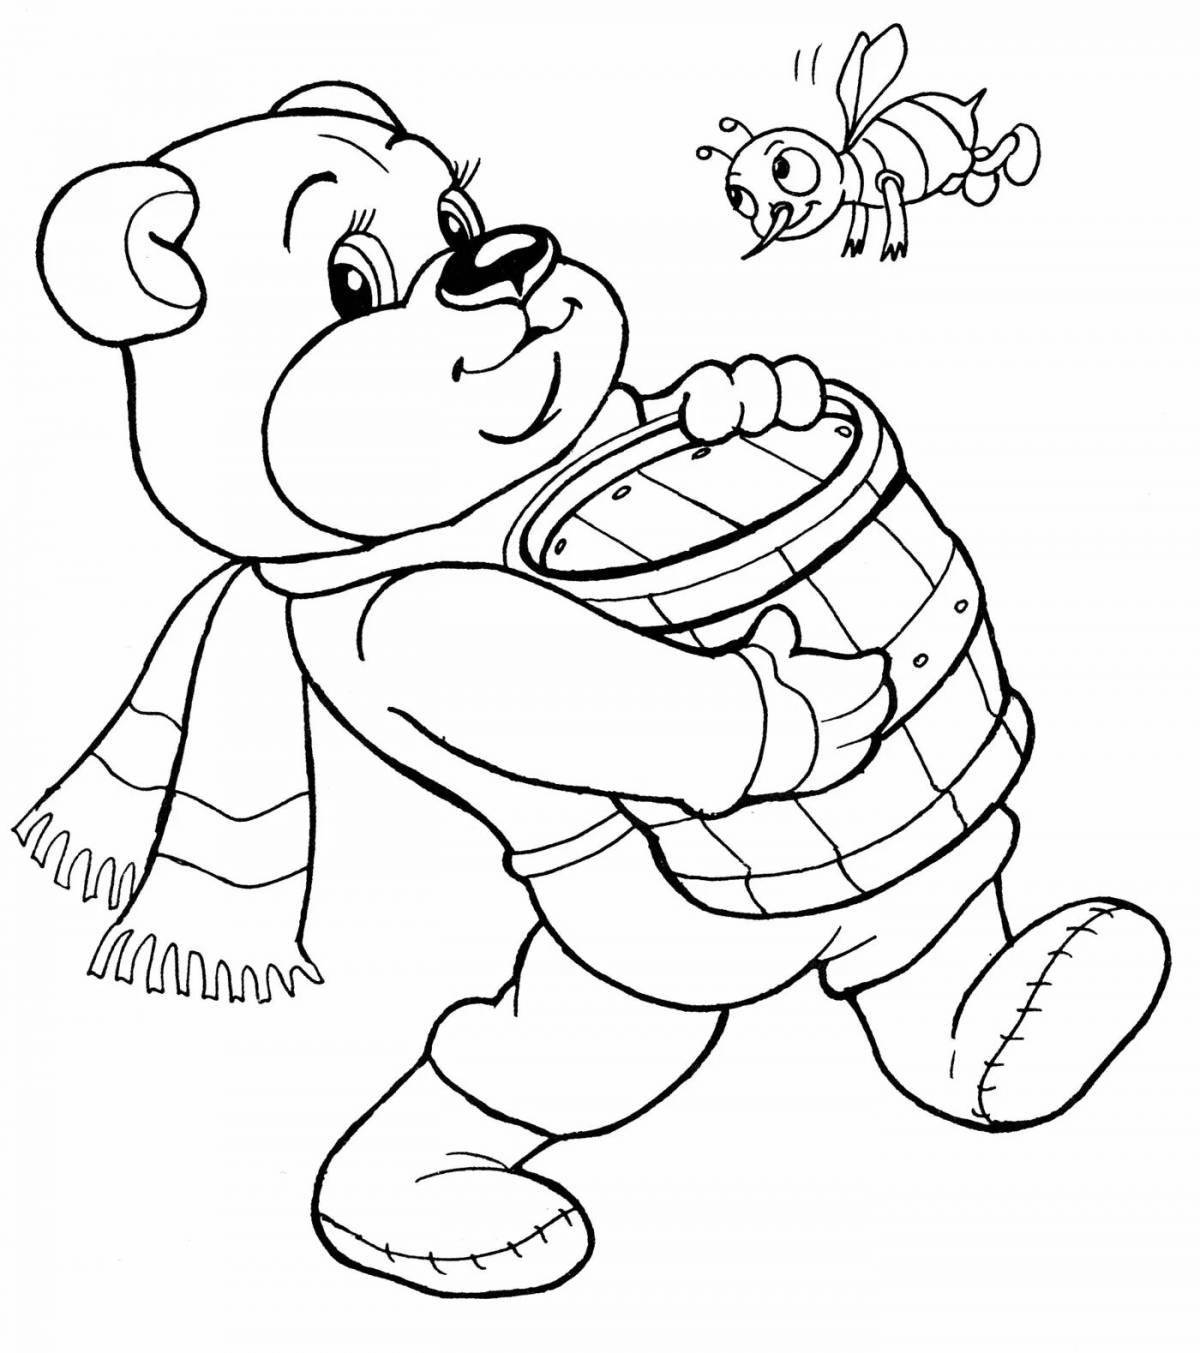 Colouring friendly bear with honey